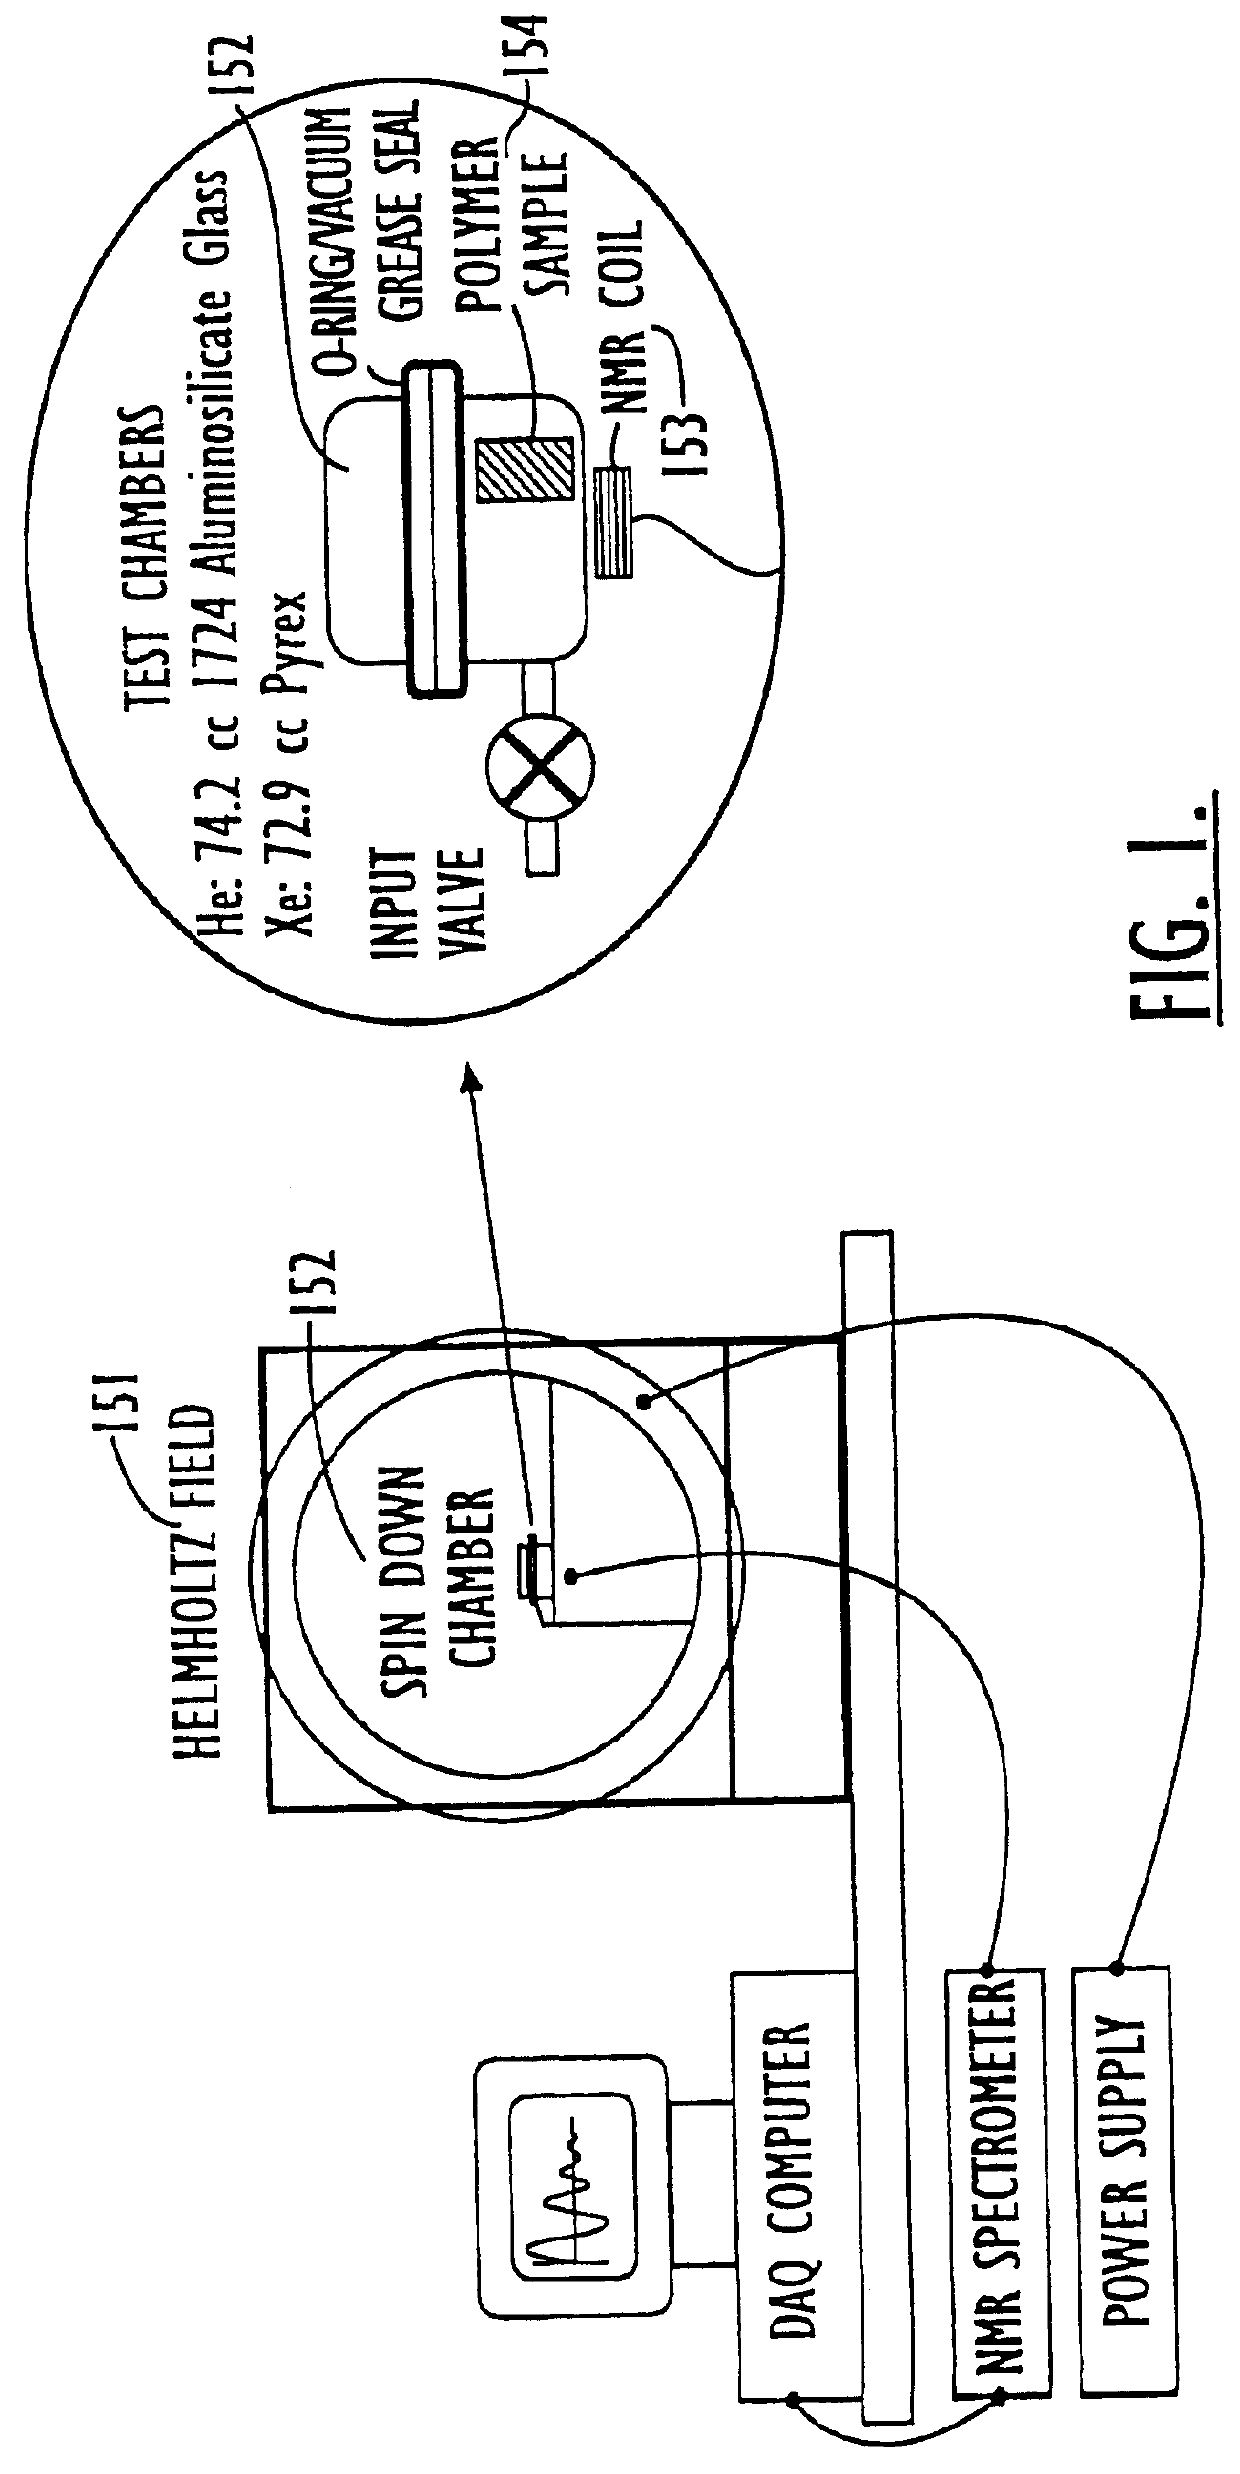 Containers for hyperpolarized gases and associated methods